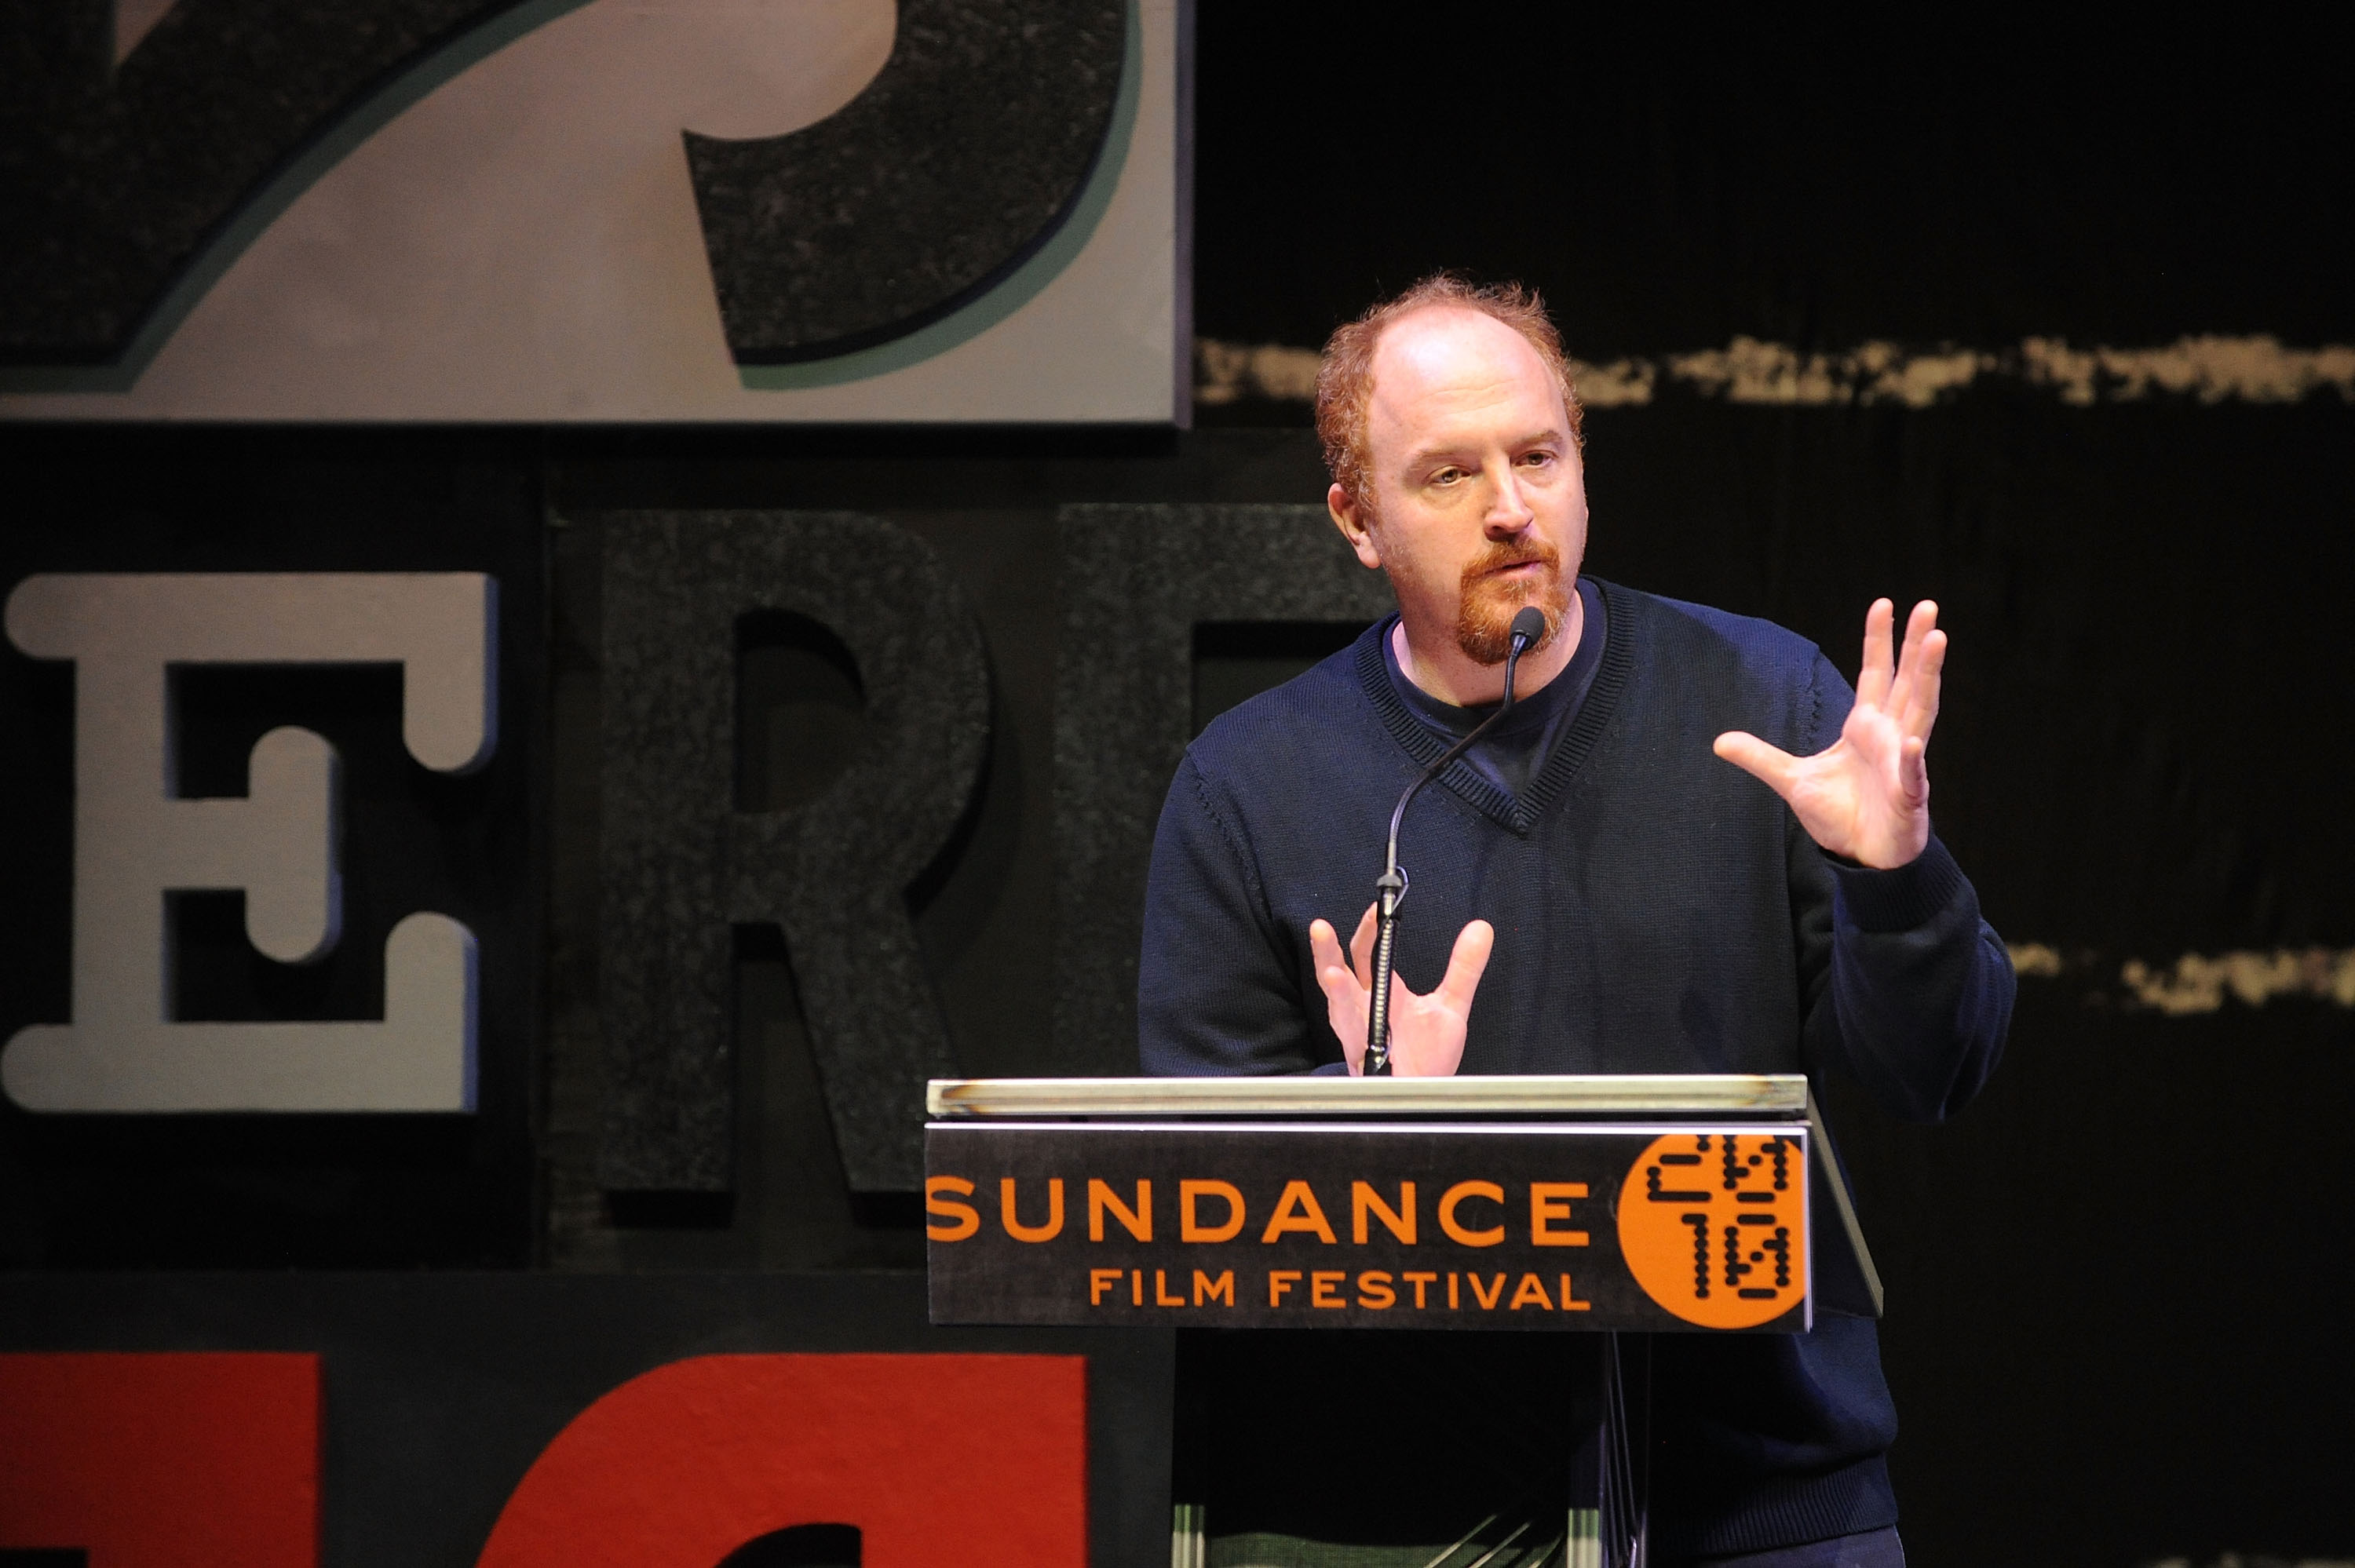 Louis C.K. speaks onstage at the Awards Night Ceremony during the 2010 Sundance Film Festival on January 30, 2010, in Park City, Utah. | Source: Getty Images